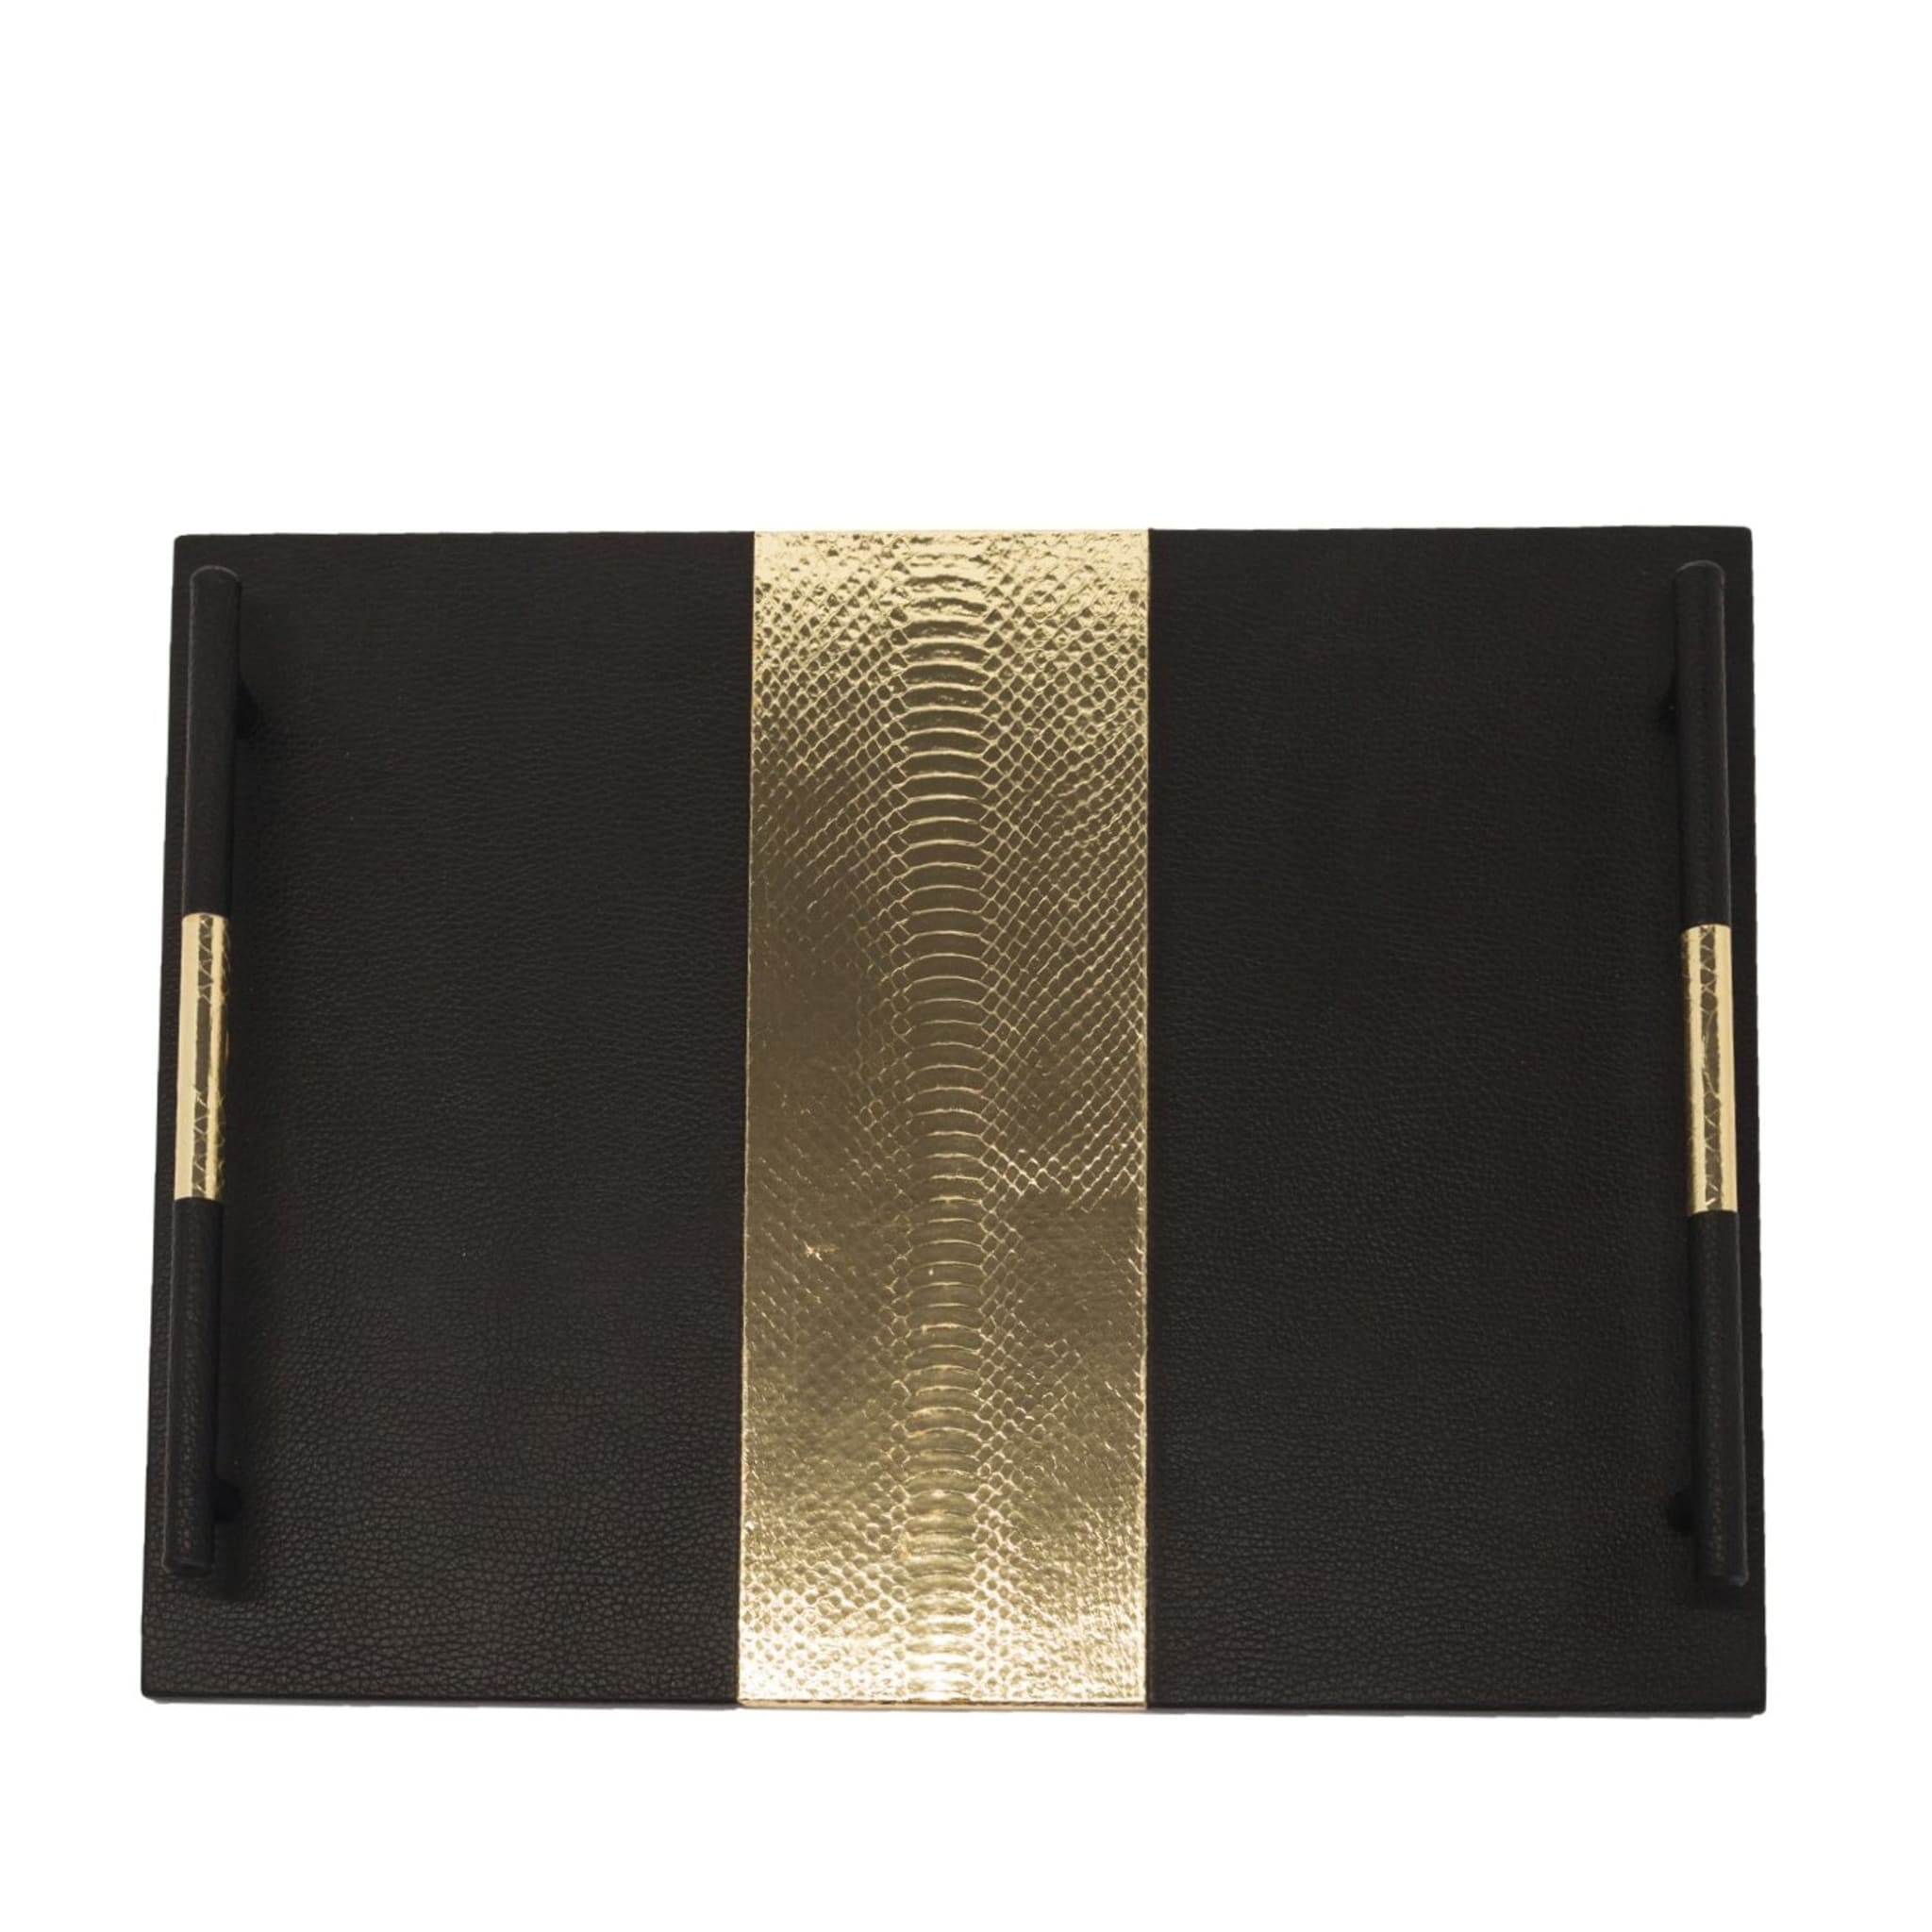 Deco Stripes Rectangular Leather Tray  - Main view